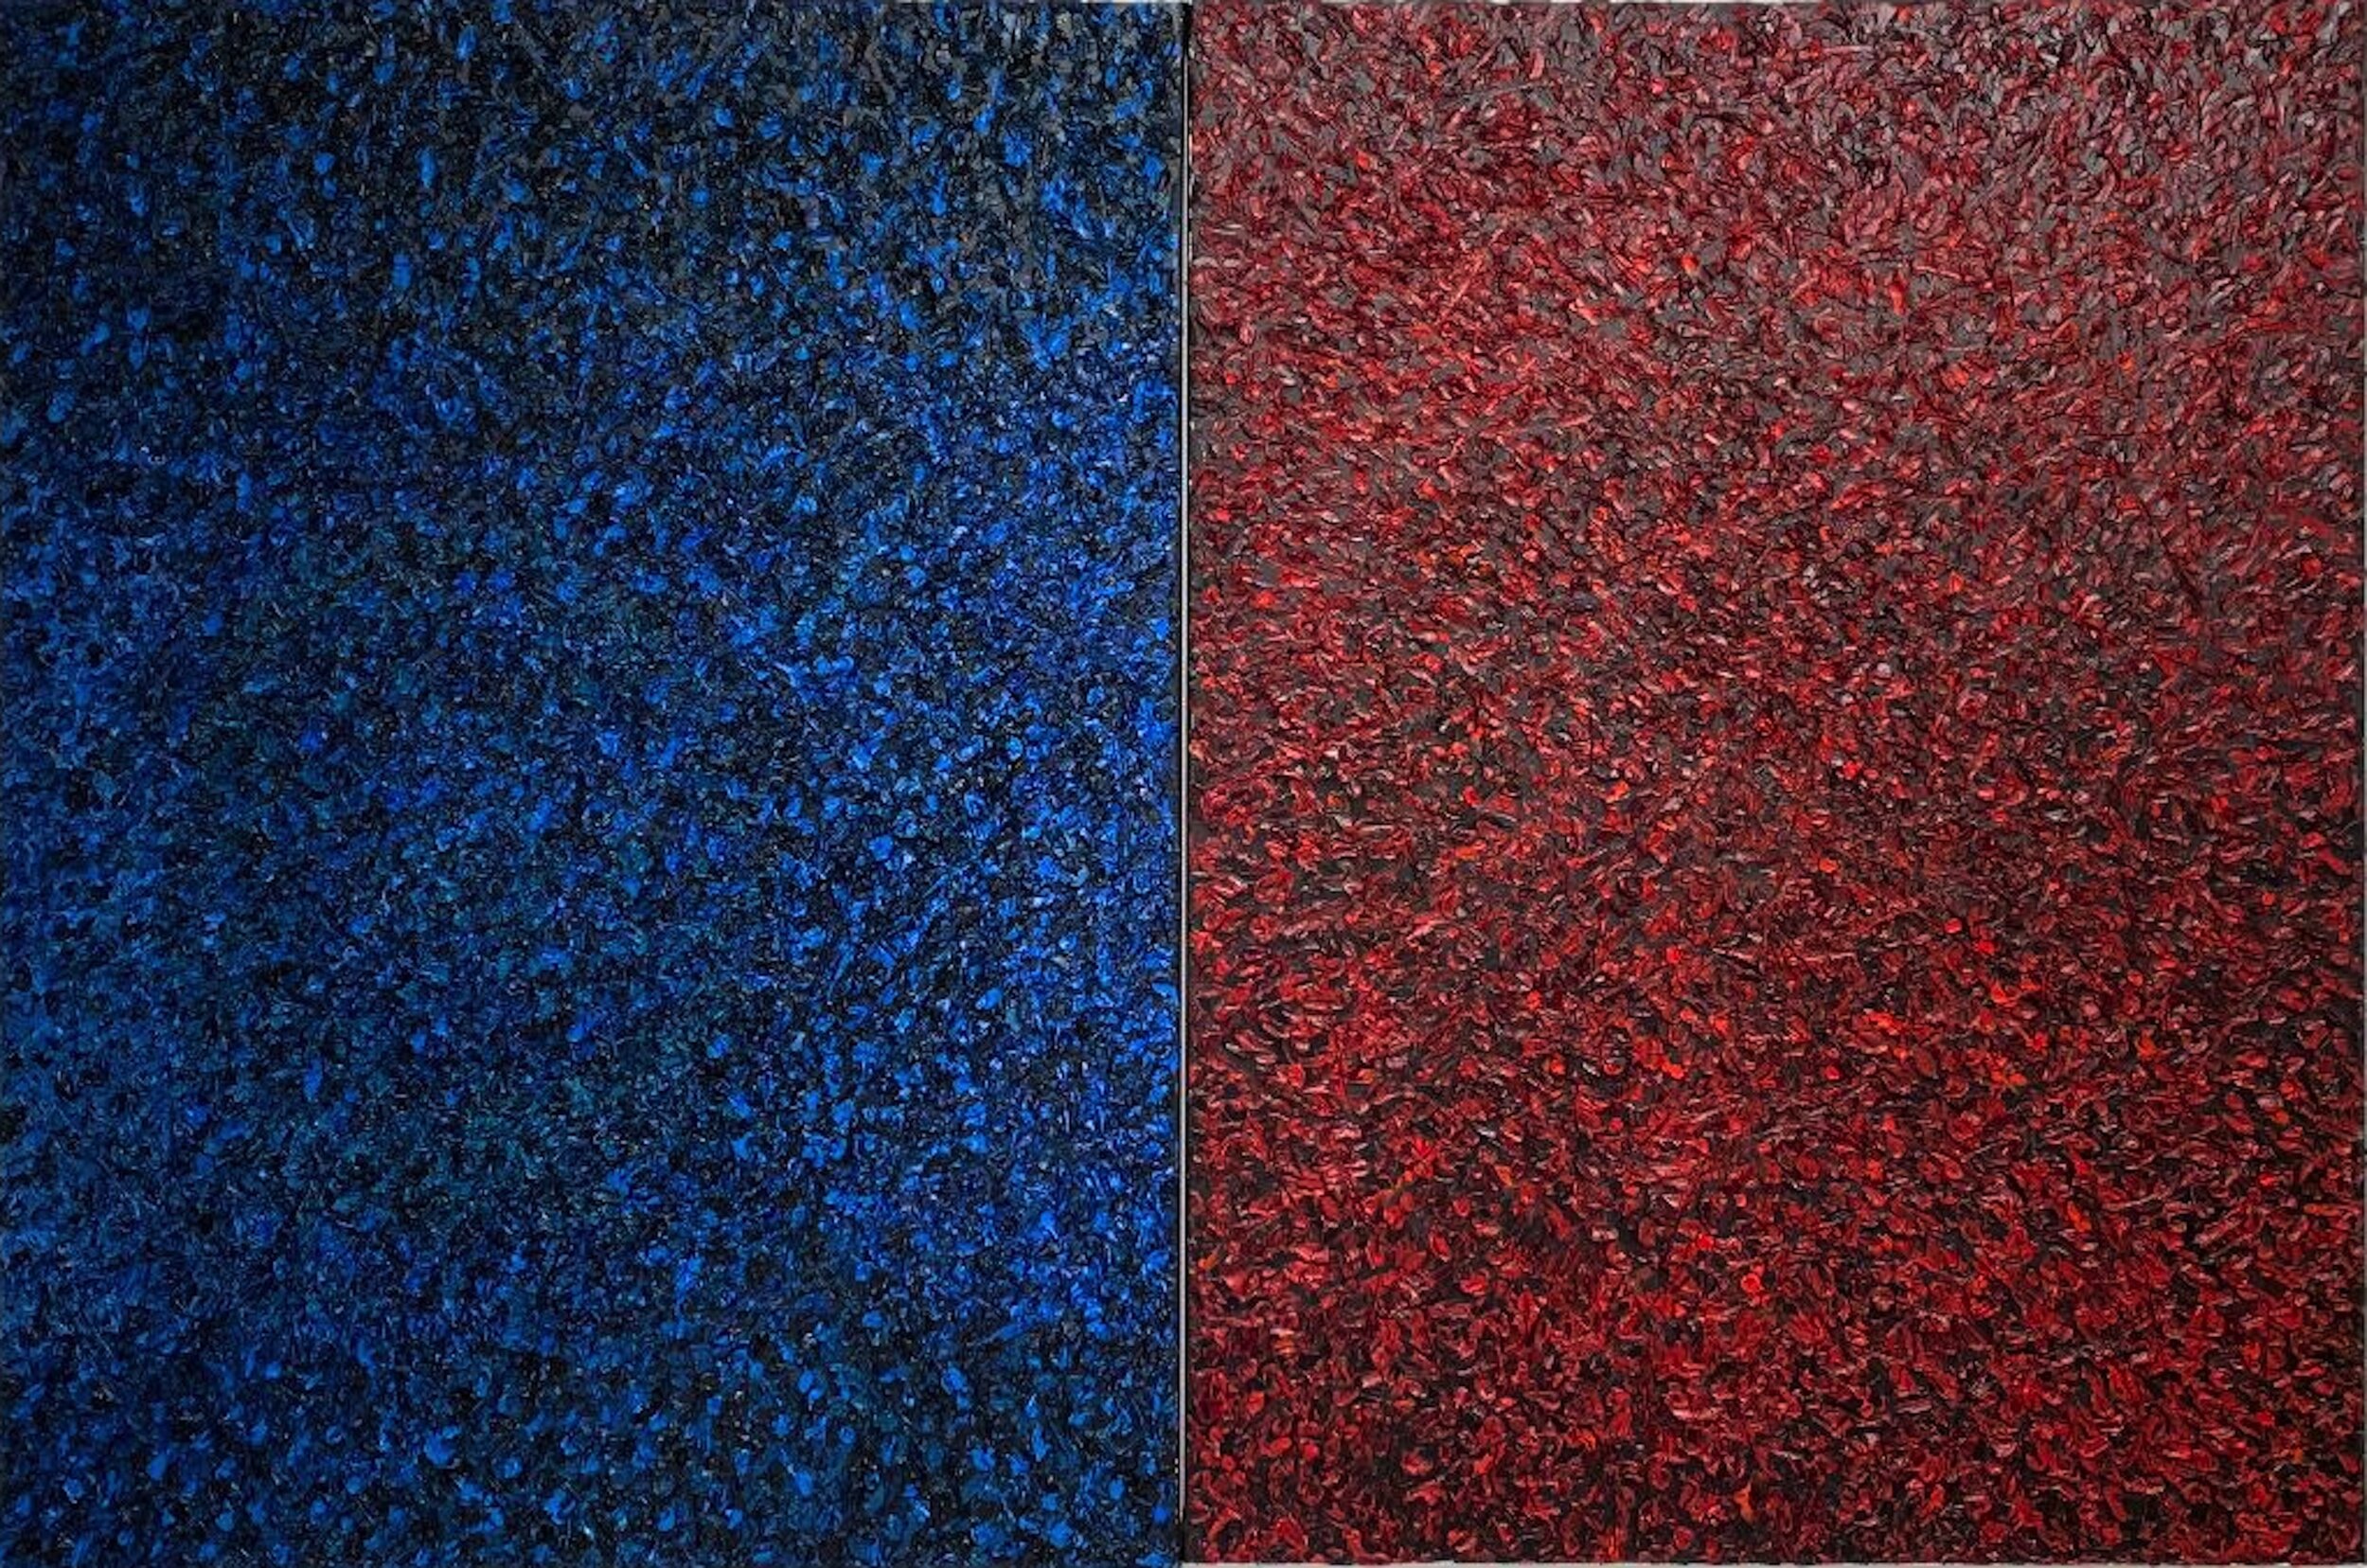 STATE OF THE UNION (Diptych), Oil on Canvas, 2017